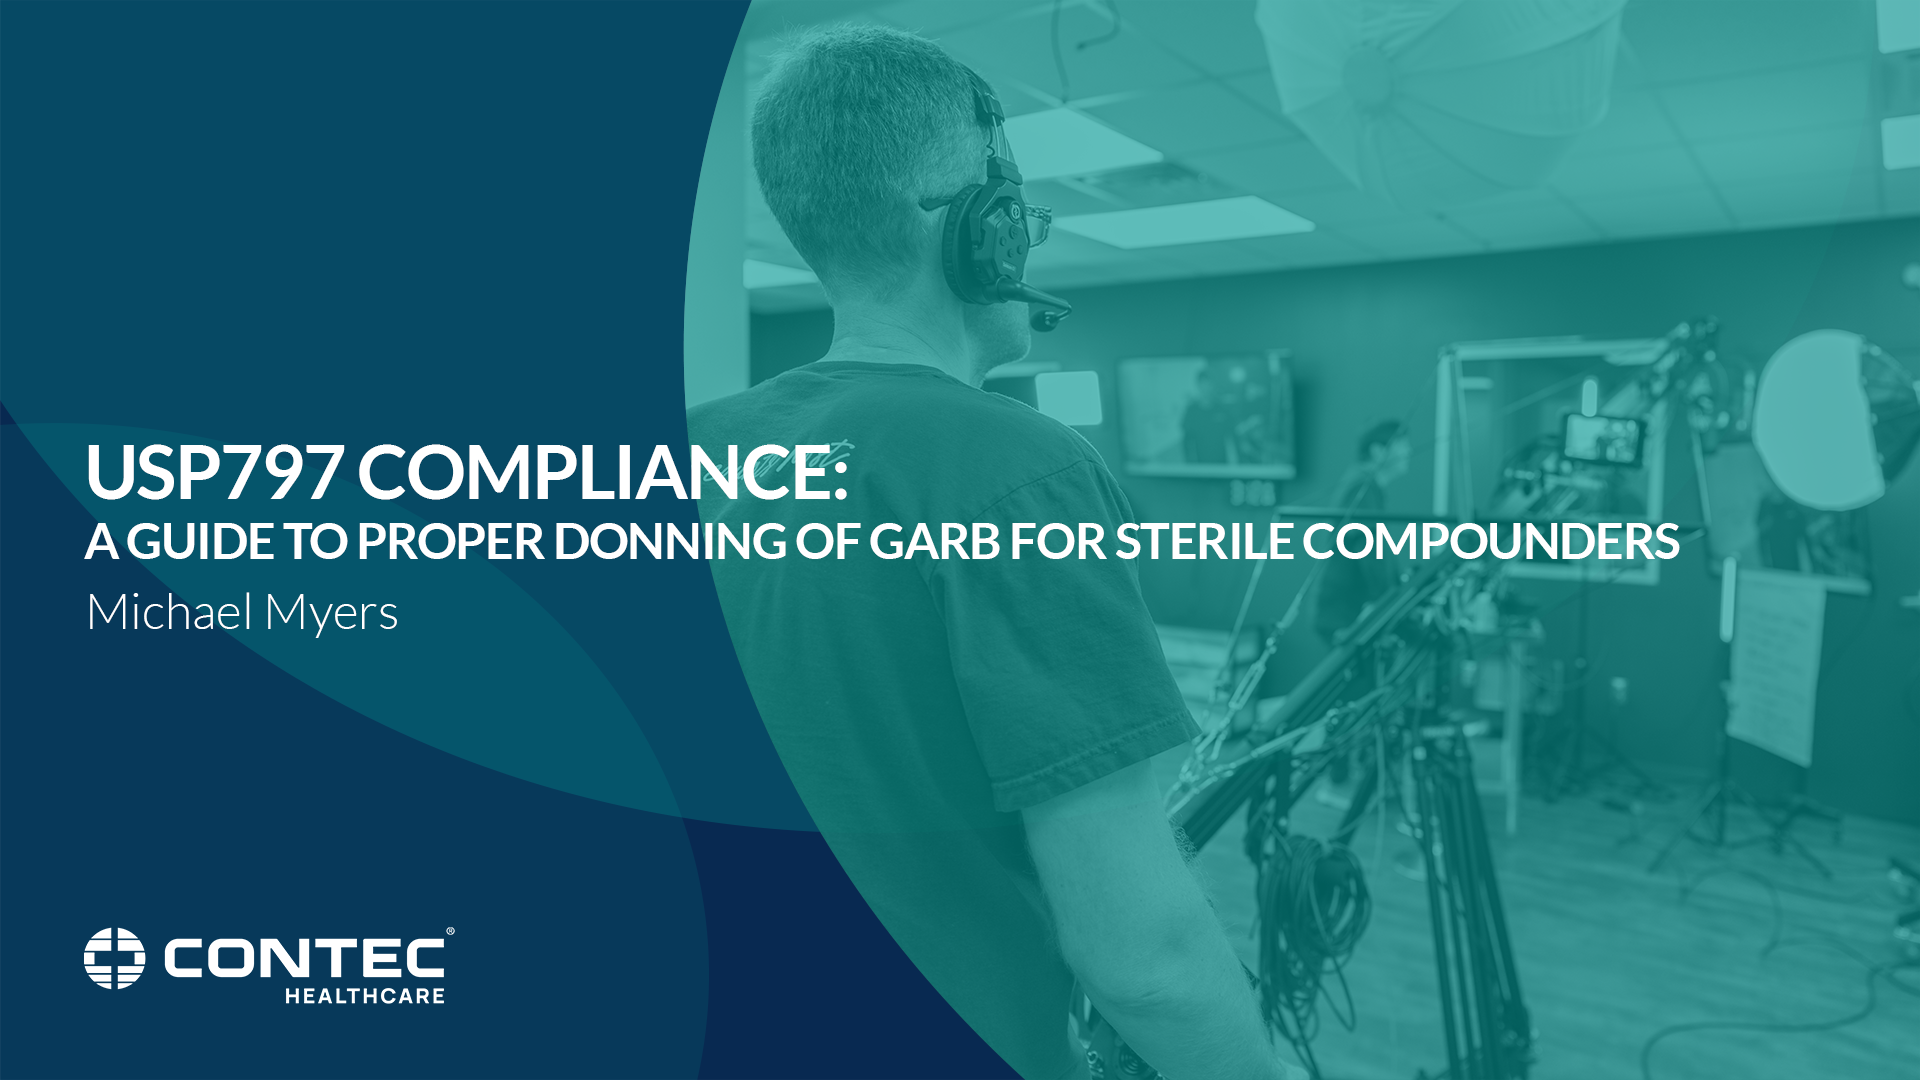 Image of USP <797> Compliance: A Guide to Proper Donning of Garb for Sterile Compounders